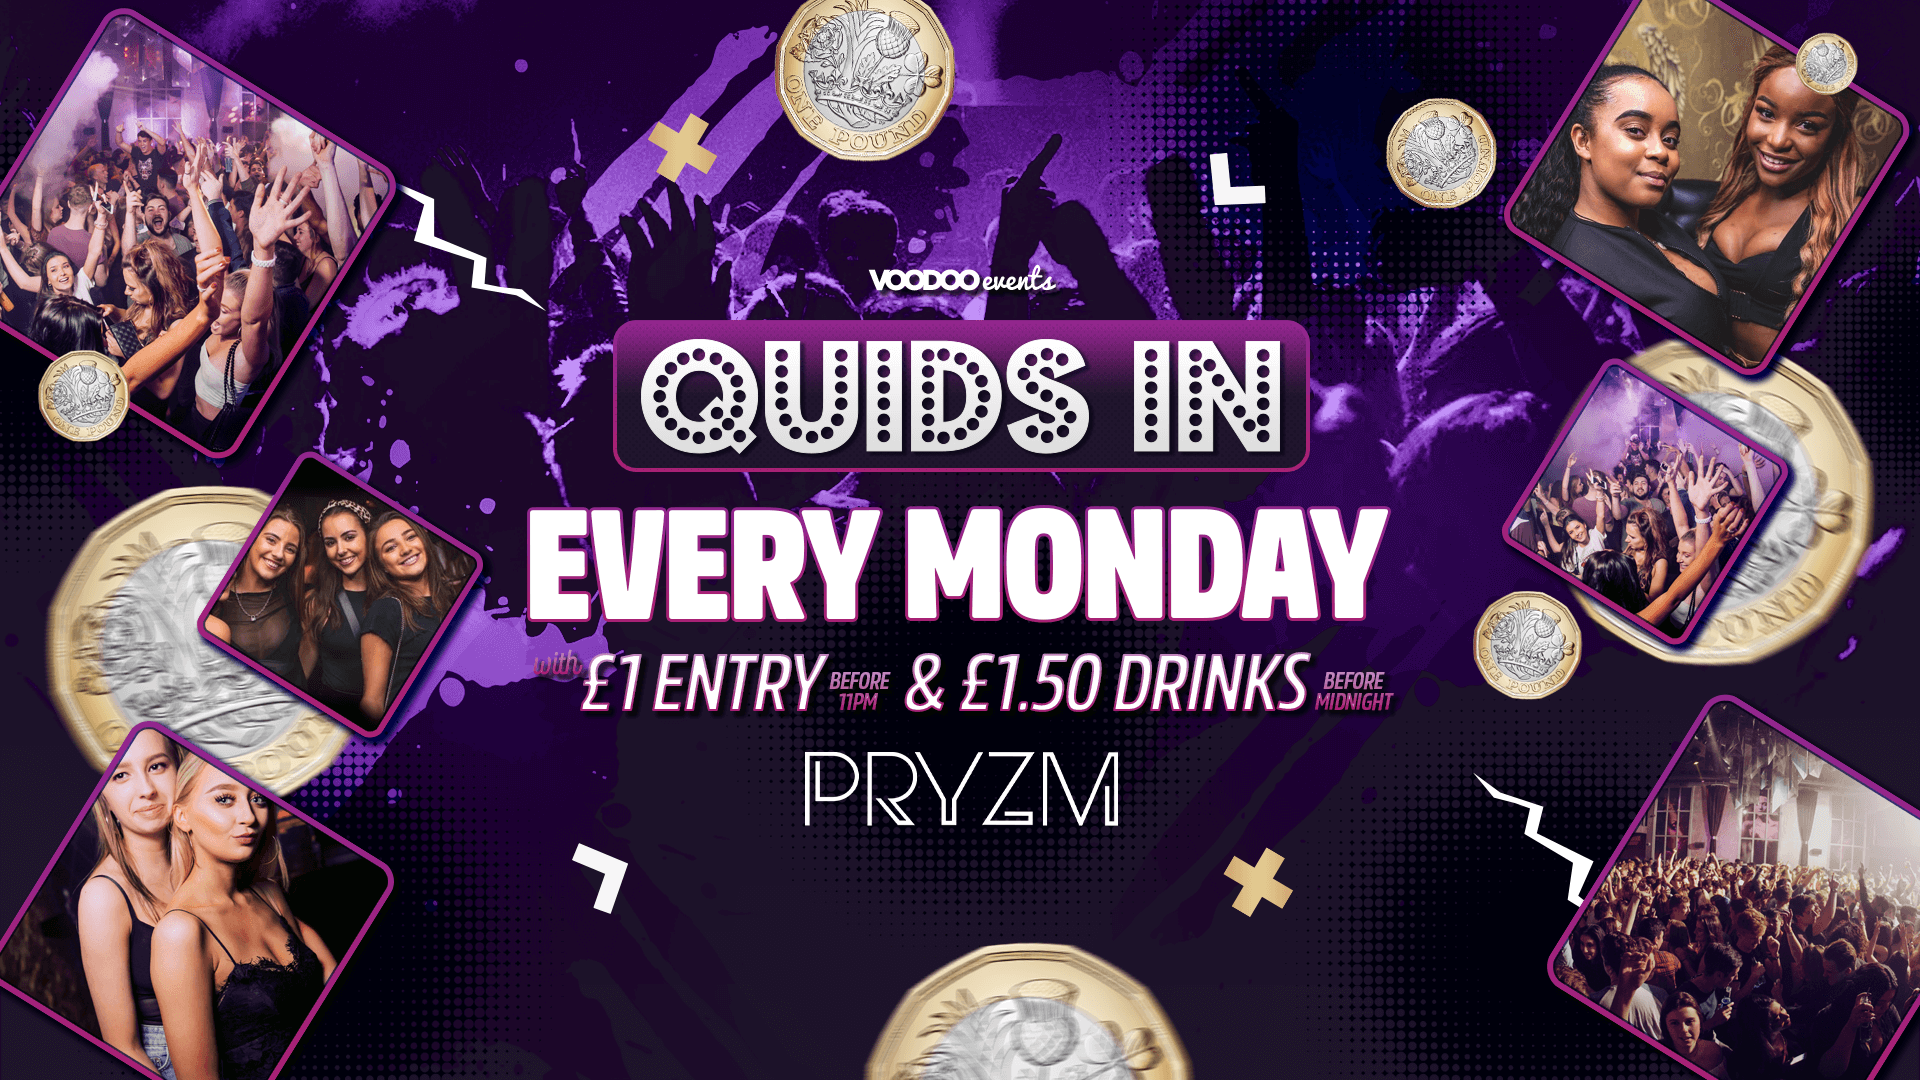 Quids In Mondays *ADVANCED TICKETS SOLD OUT* – Pryzm – Pre Freshers 13th September